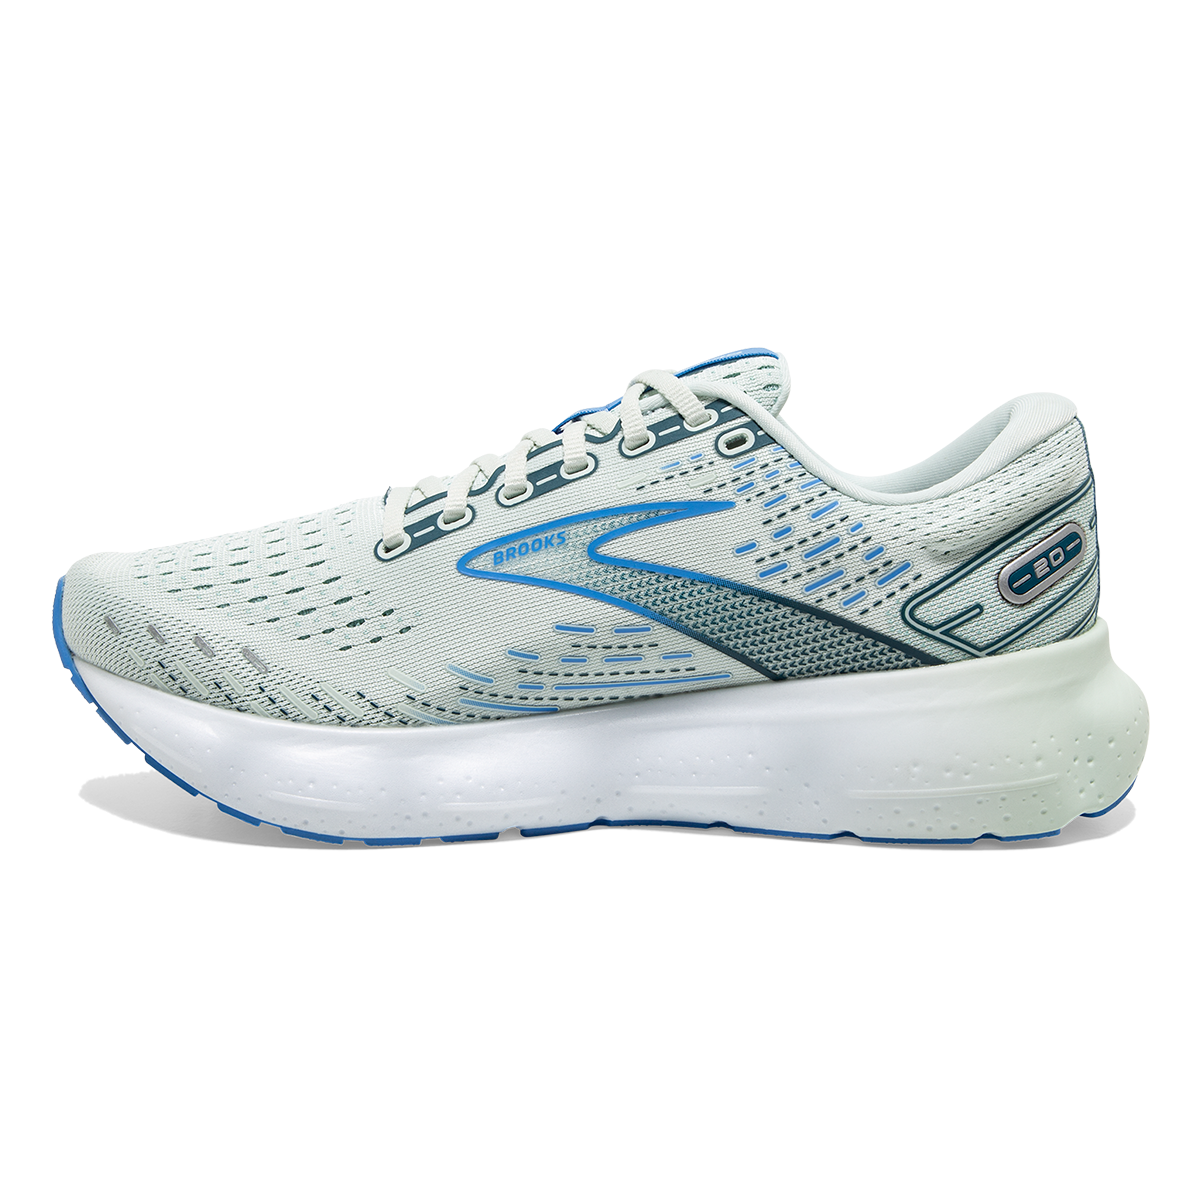 Medial view of the Women's Glycerin 20 by Brook's in the color Blue Glass/Marina/Legion Blue